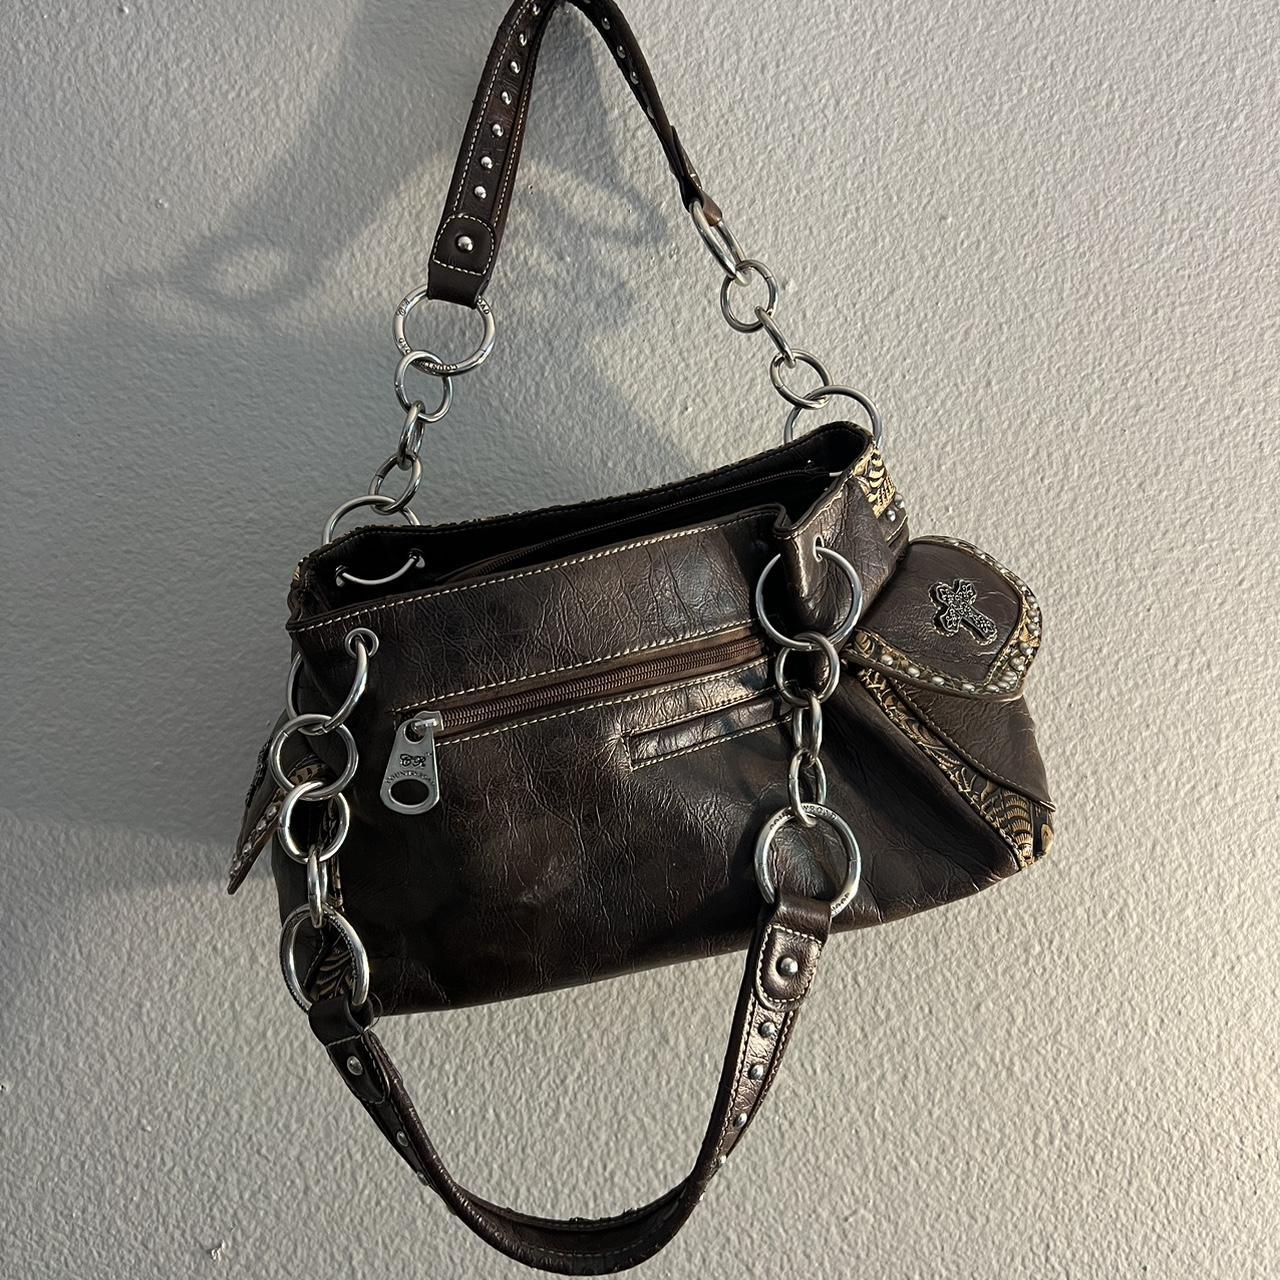 Country Road Women's Brown and Silver Bag (2)